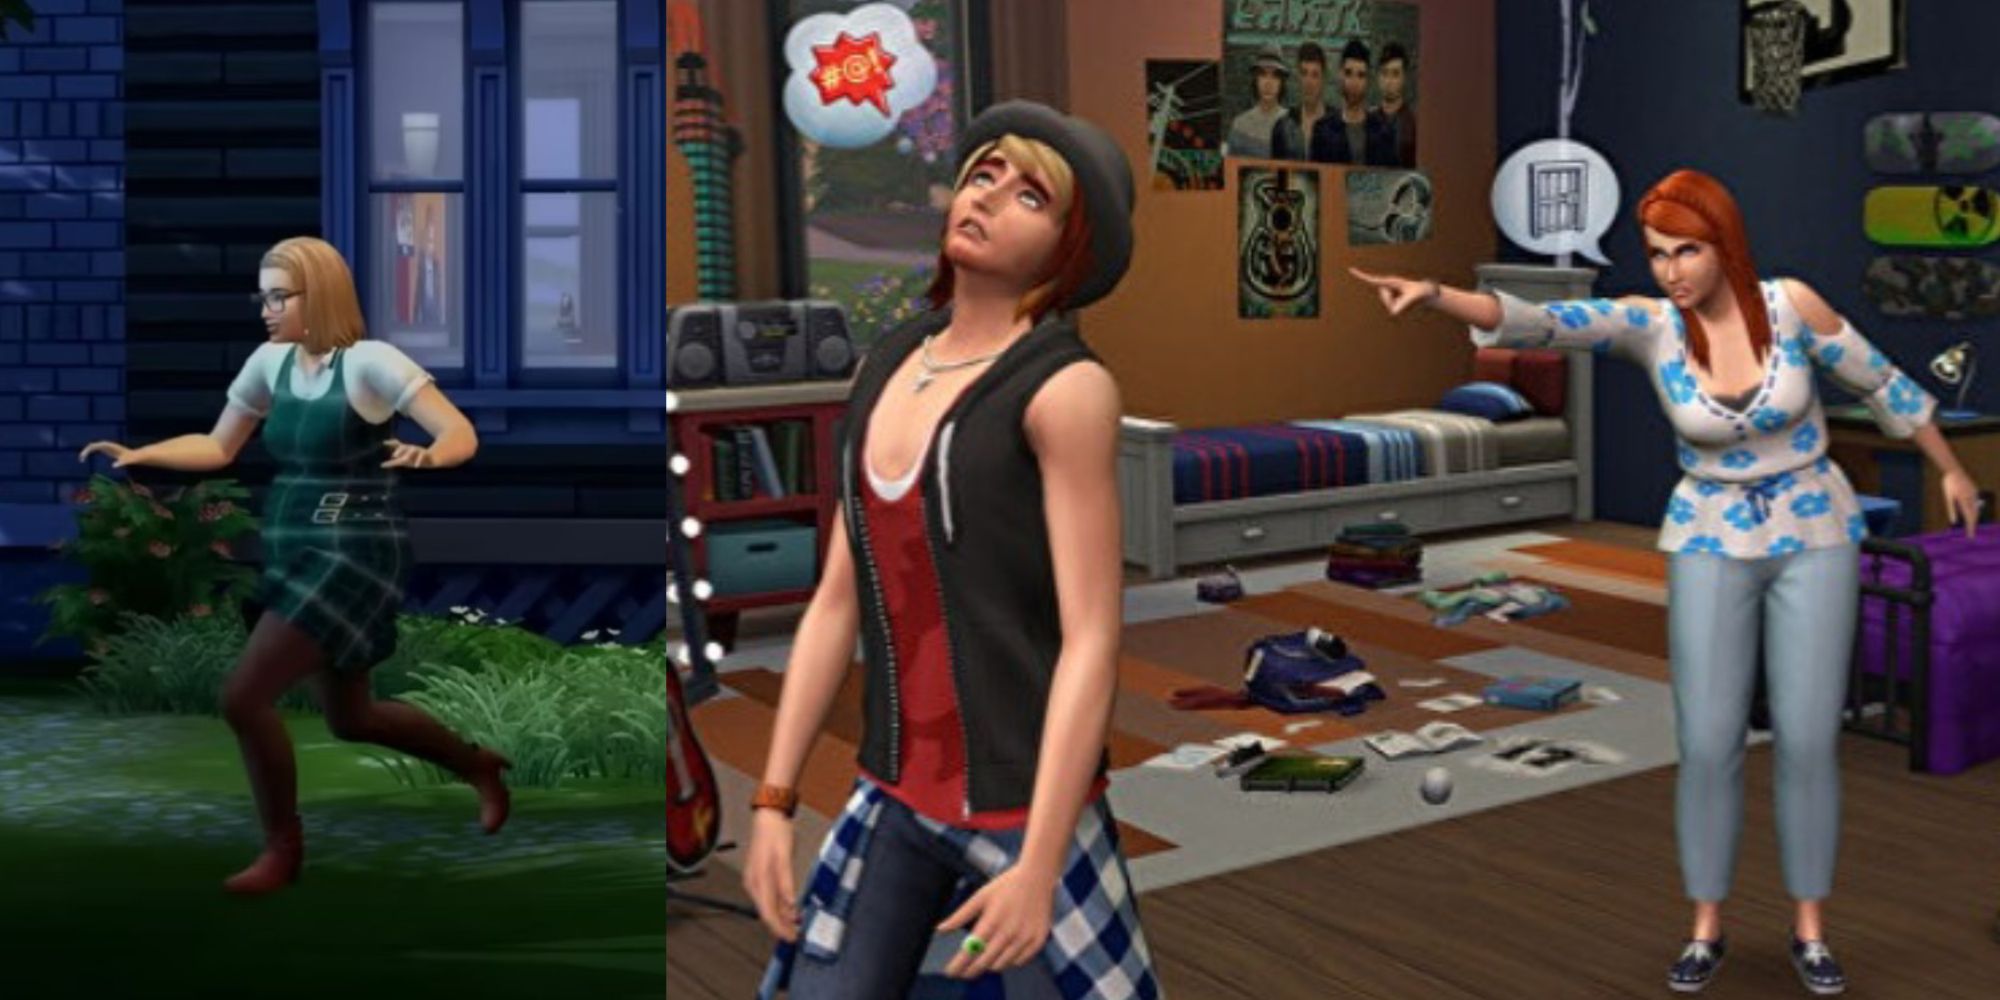 Teen Sim caught sneaking out in The Sims 4